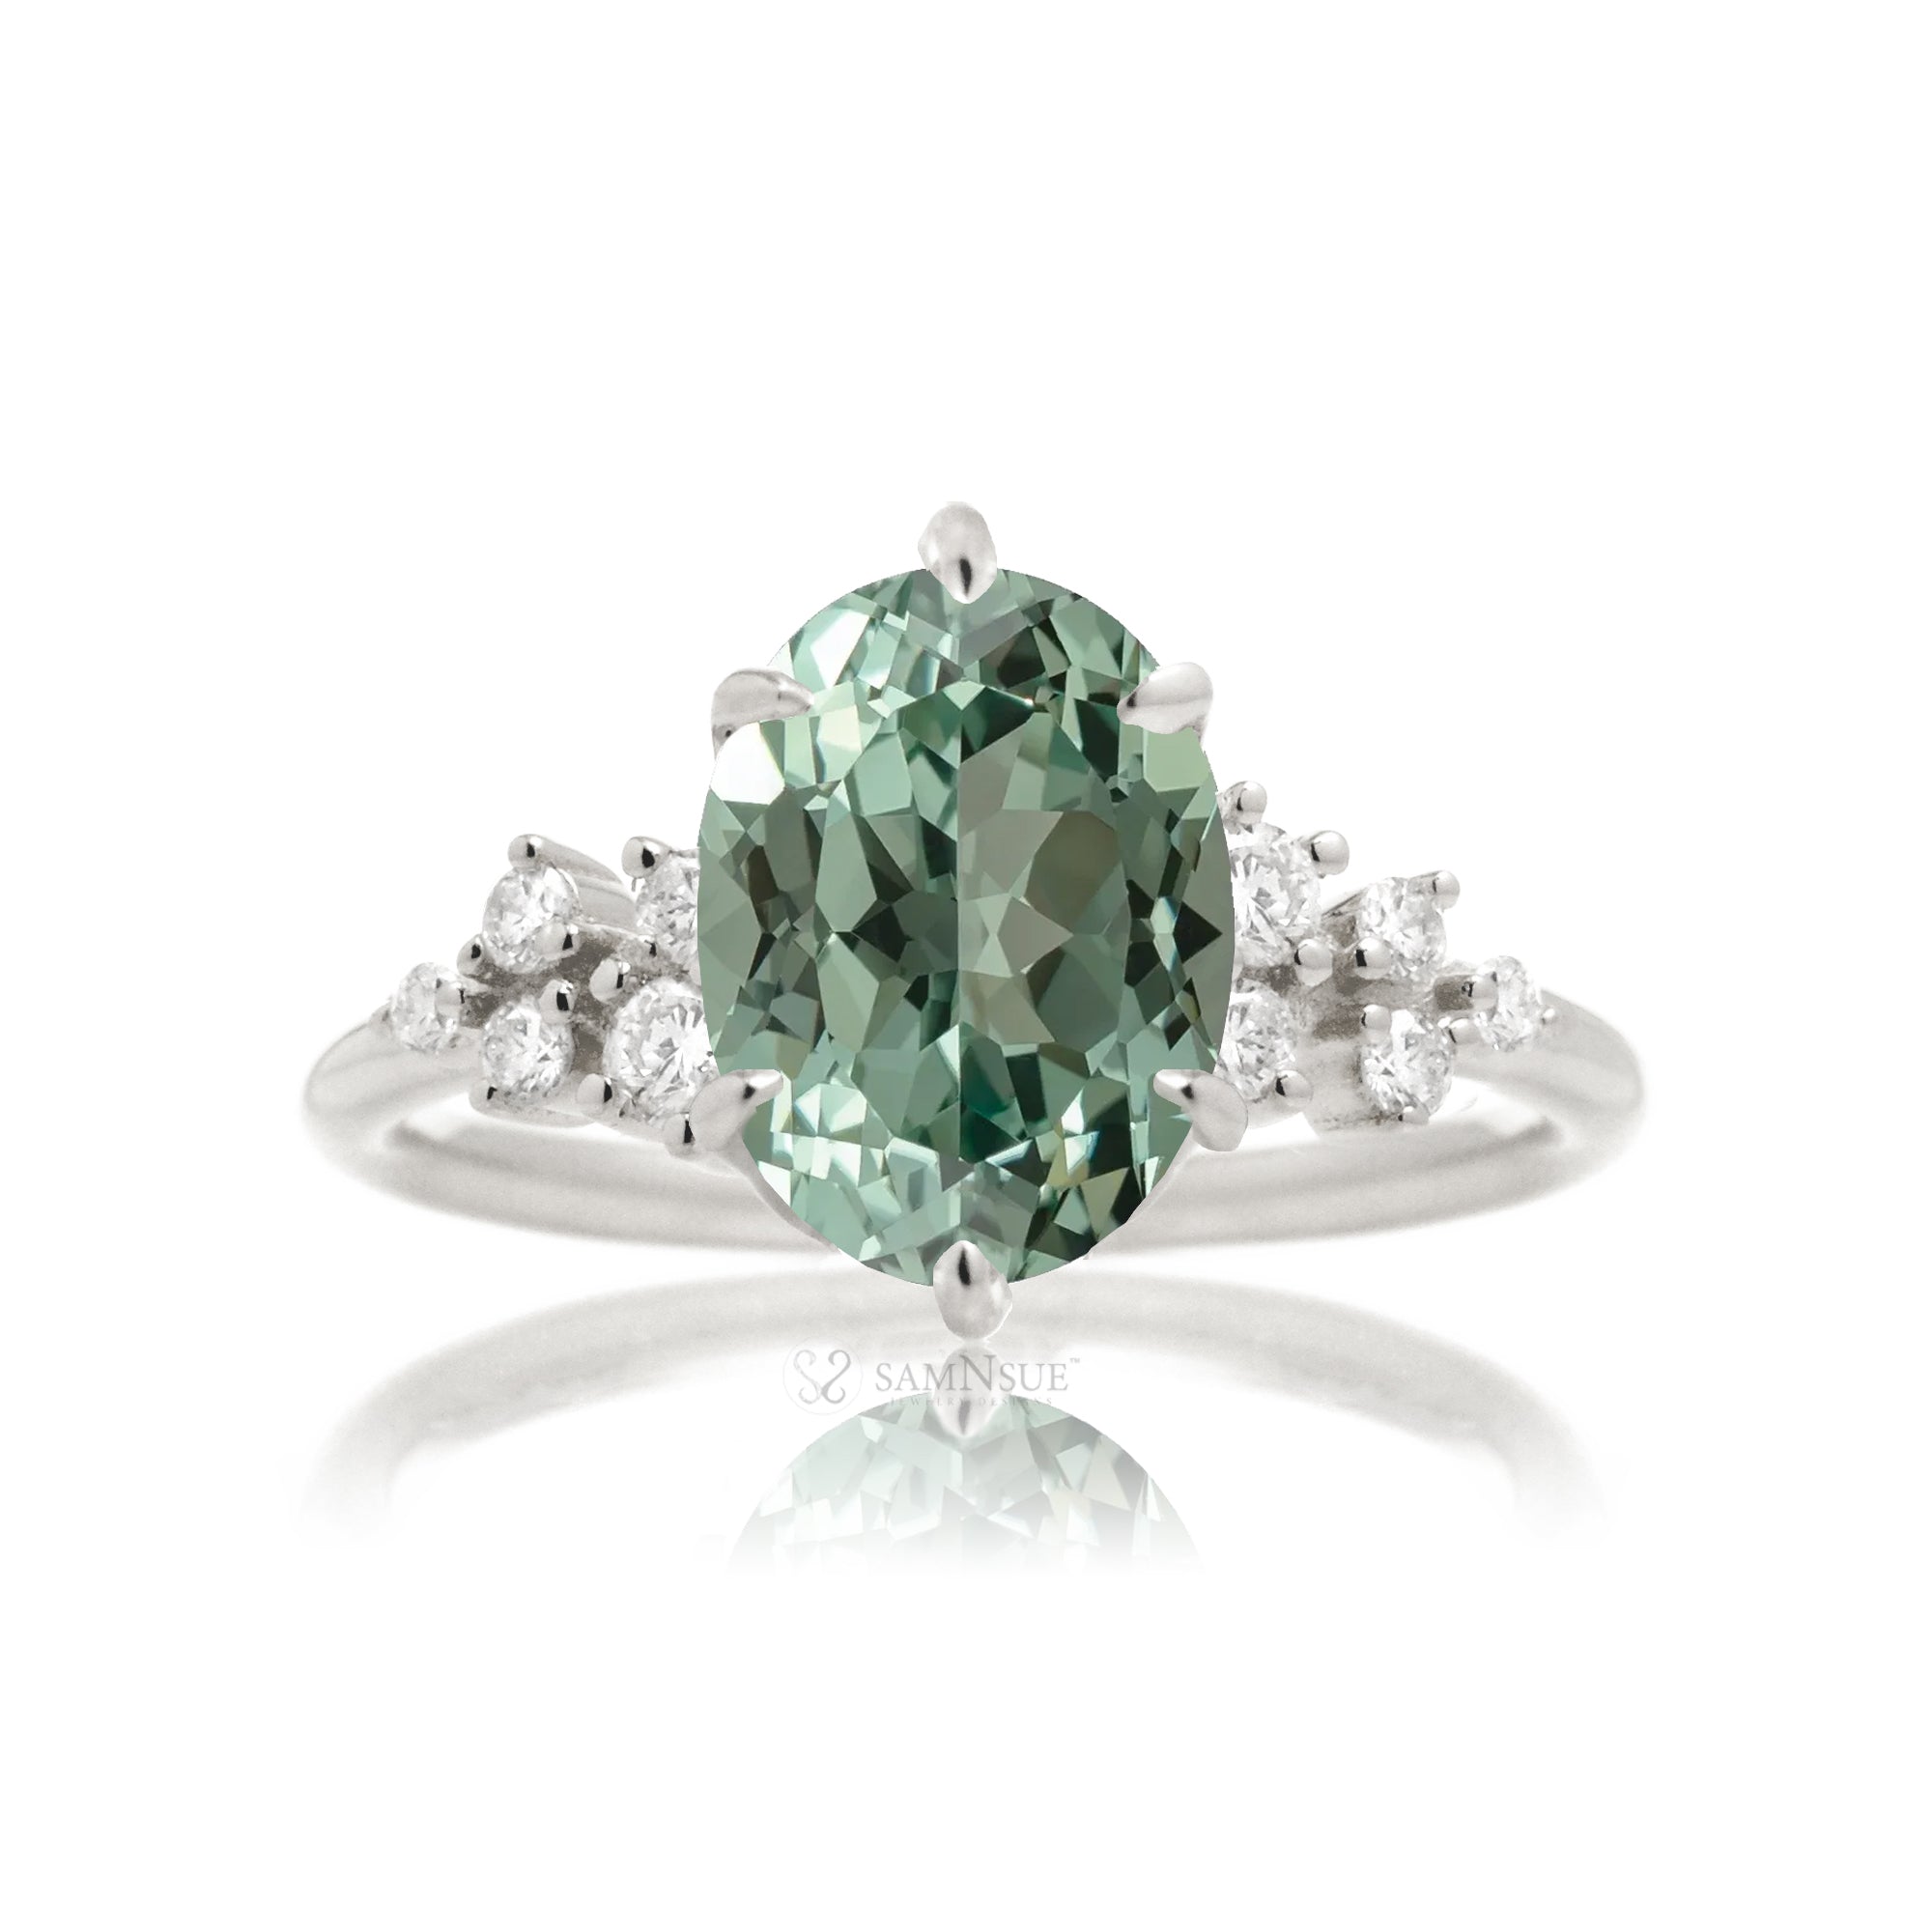 Green sapphire ring oval cut with diamond accent in white gold